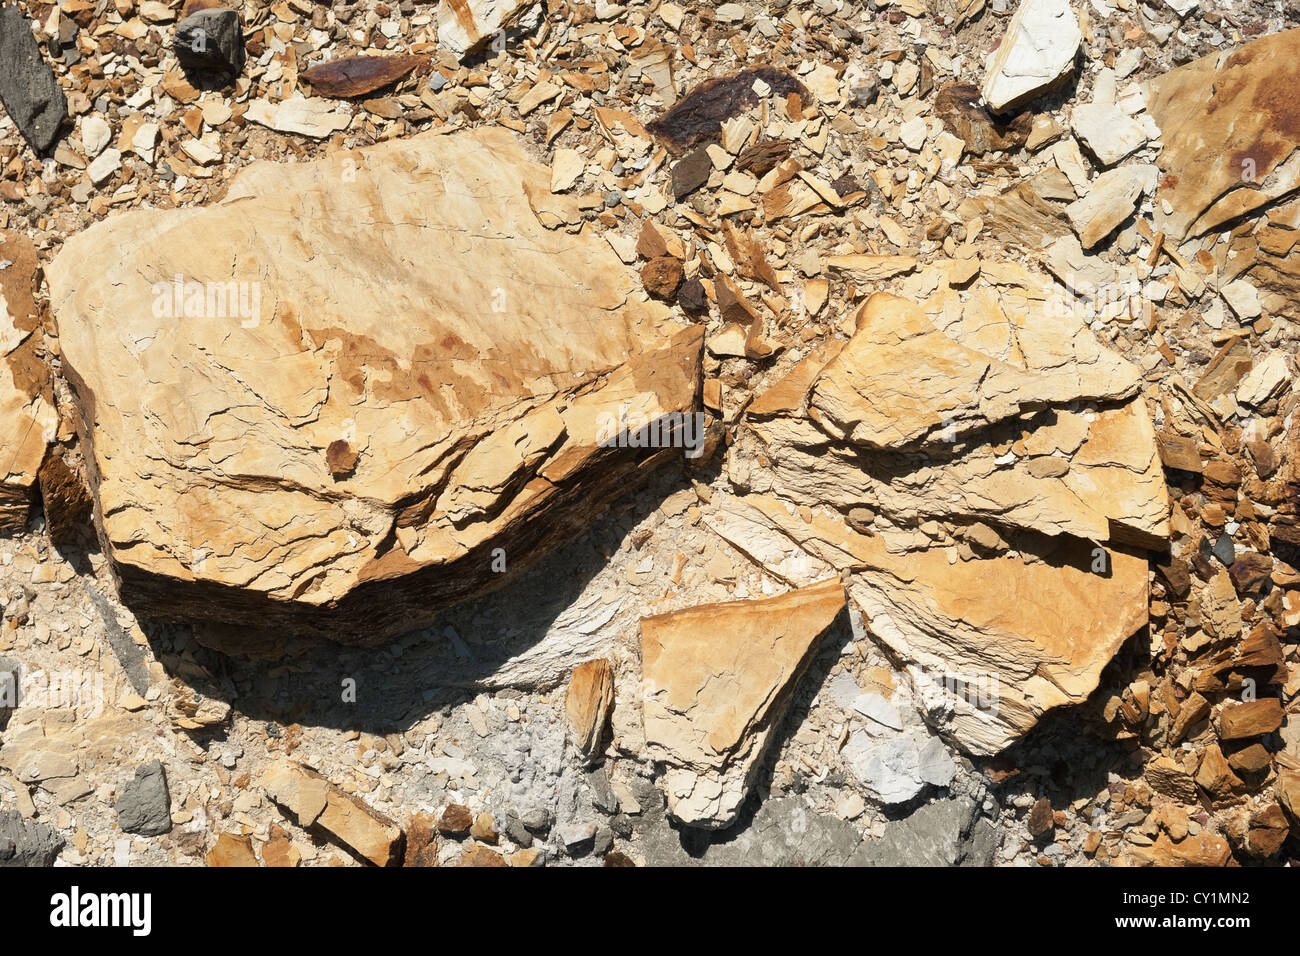 Shale fragments in the abandoned mine field of Lousal, Grandola, Portugal Stock Photo